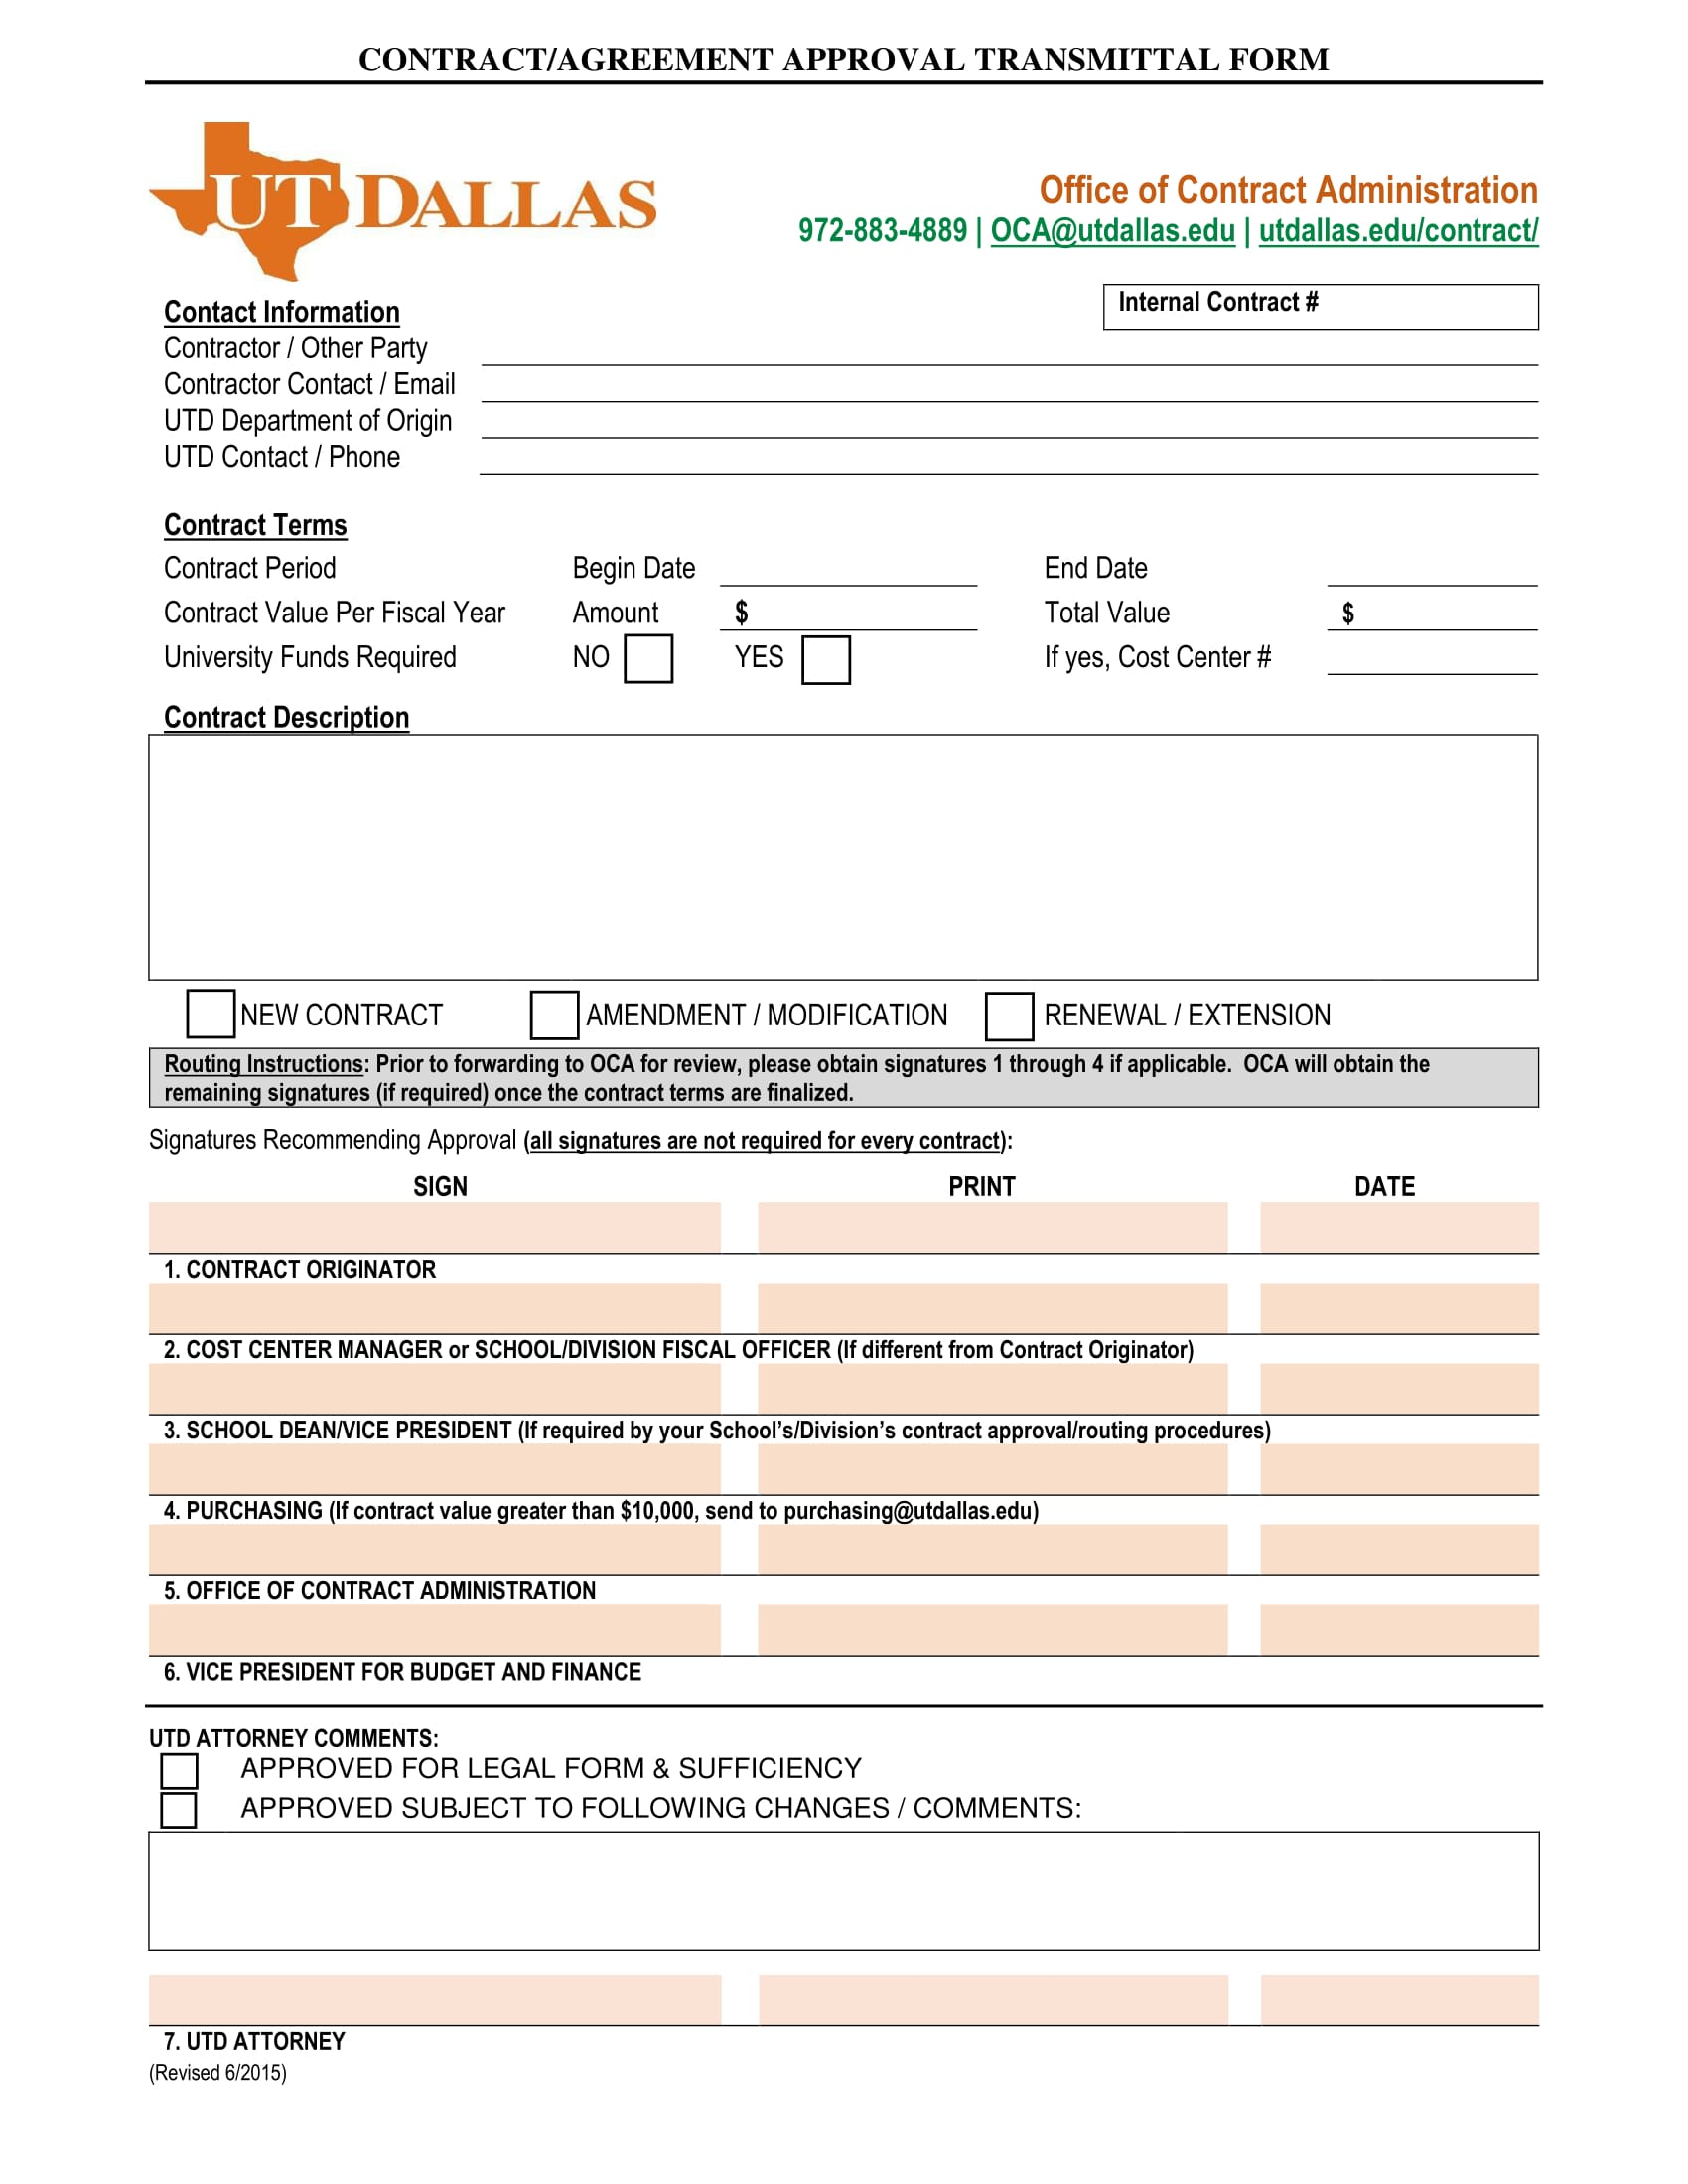 contract approval transmittal agreement form